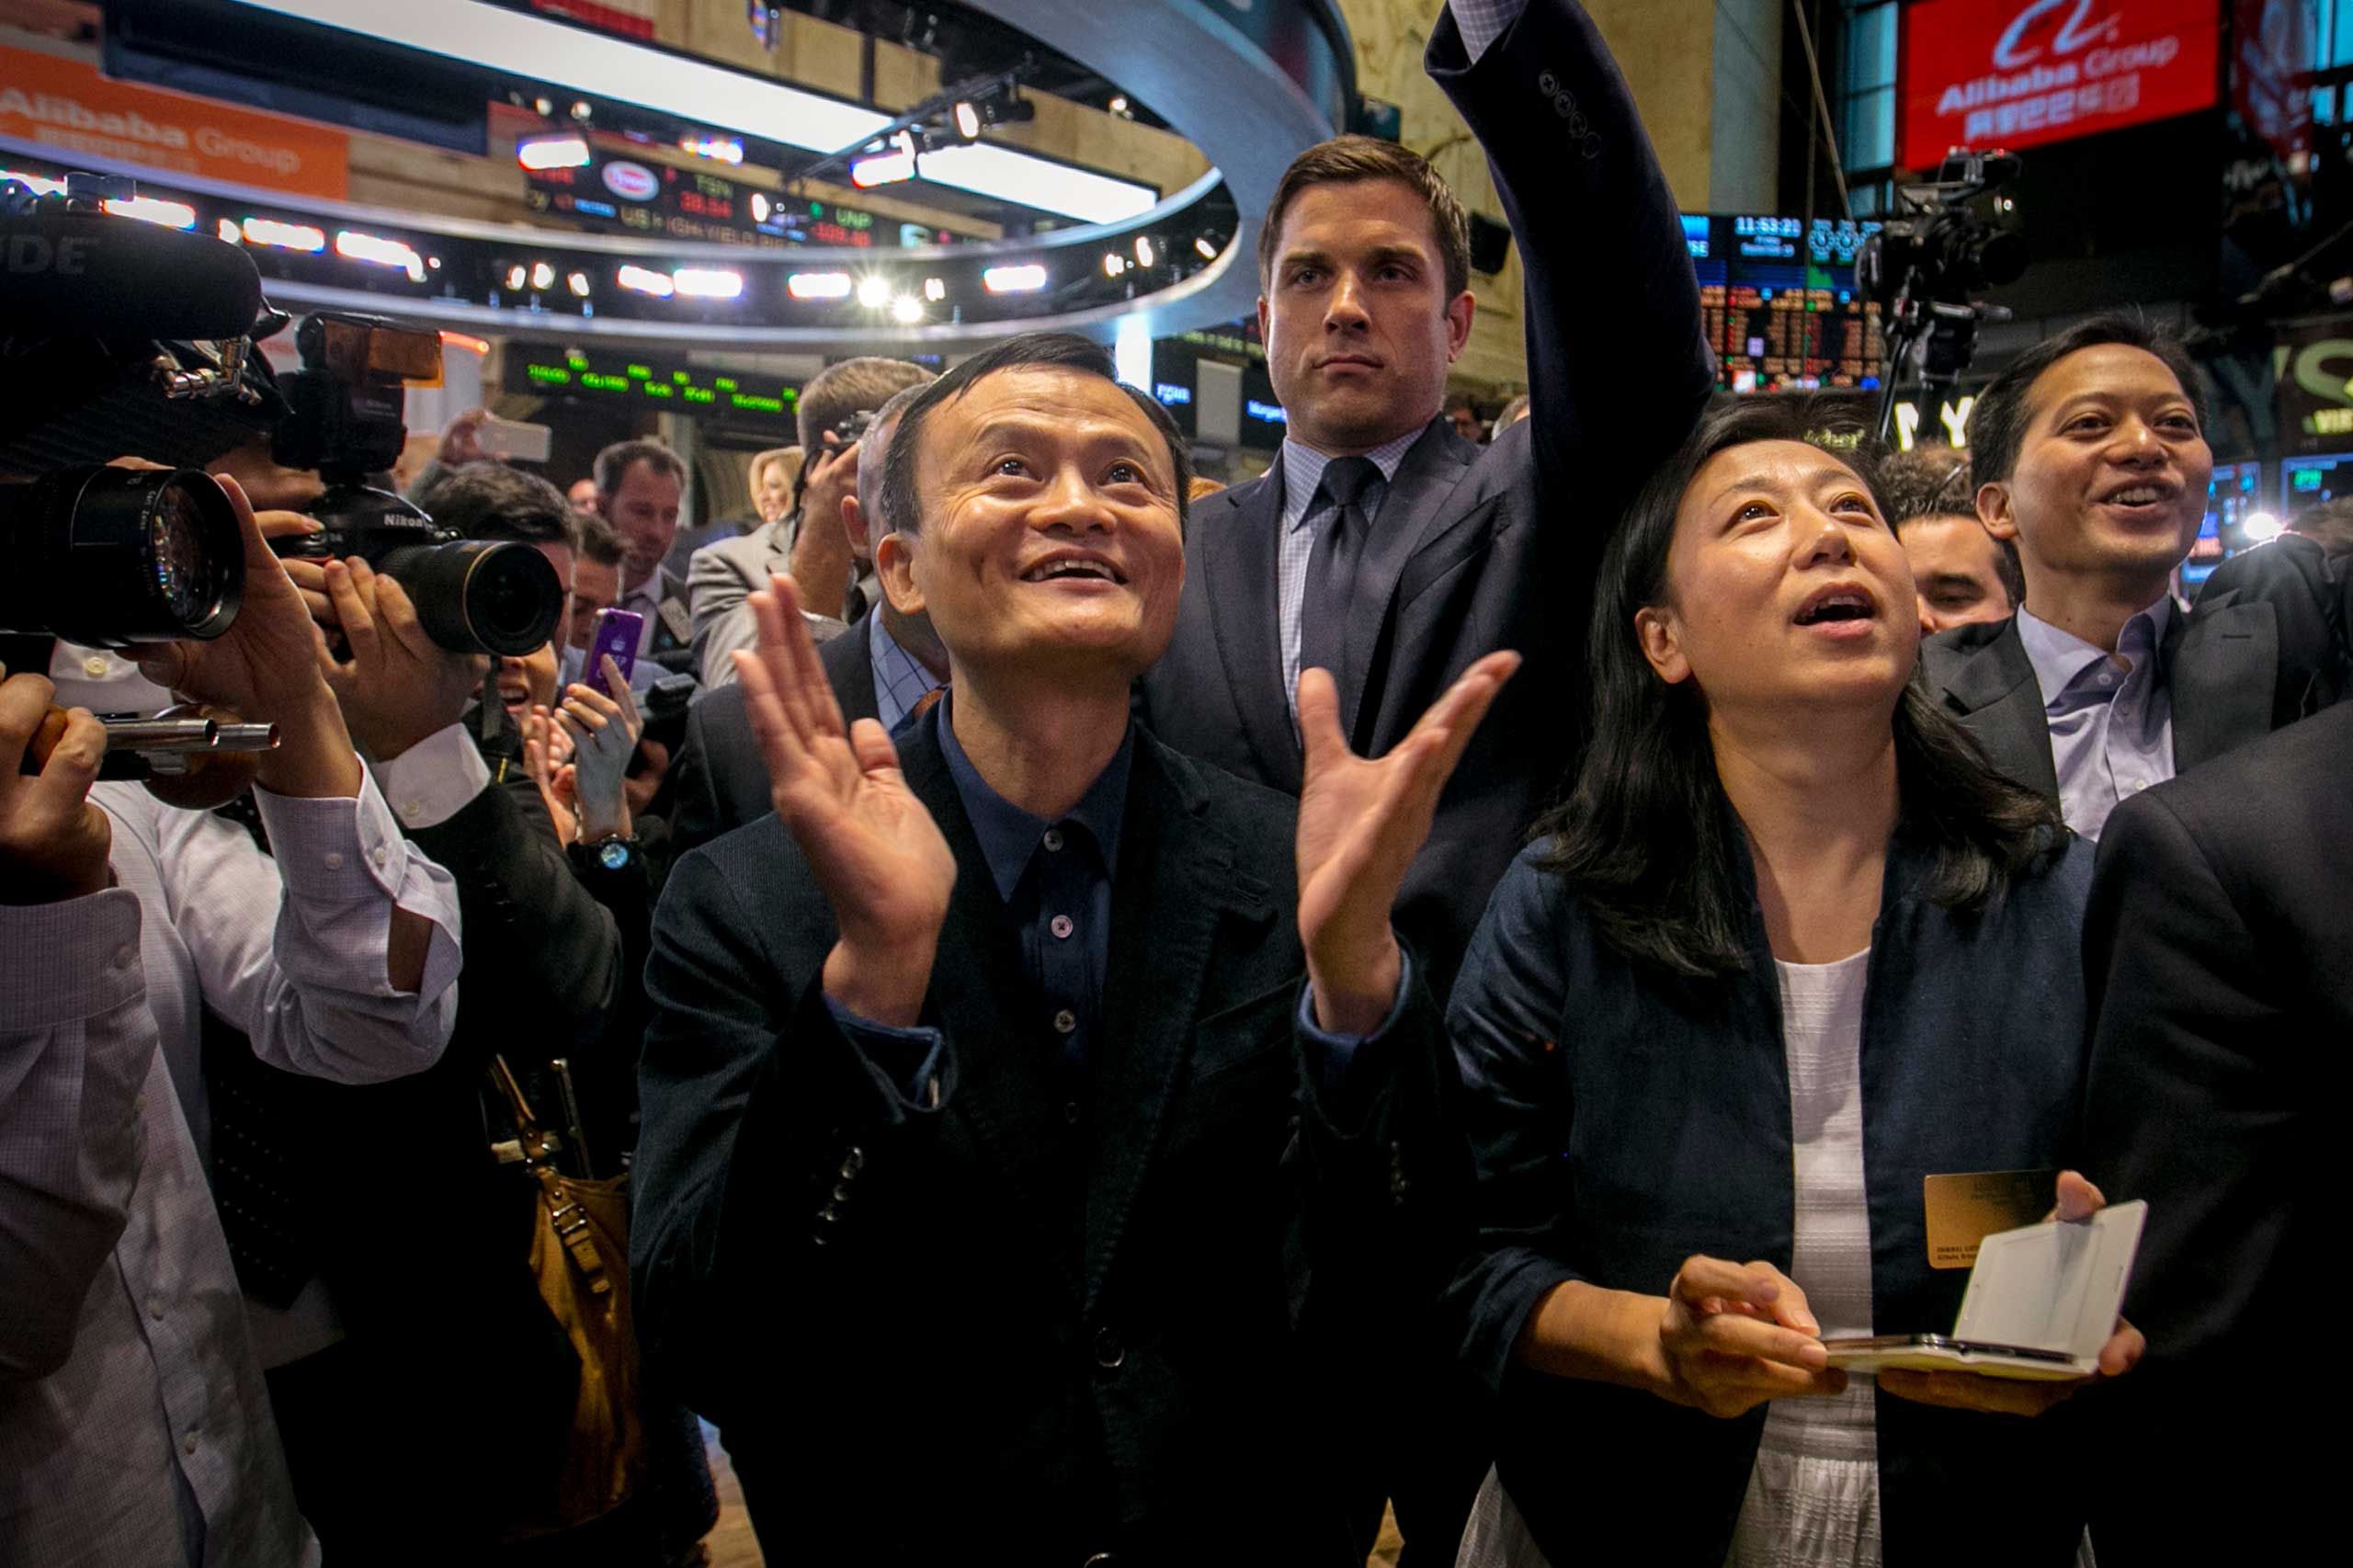 Alibaba Group Holding Ltd founder Jack Ma and Chief Financial Officer Maggie Wu react as the company's initial public offering, under the ticker "BABA", begins trading at the New York Stock Exchange in New York, Sept. 19, 2014. (Brendan McDermid—Reuters)